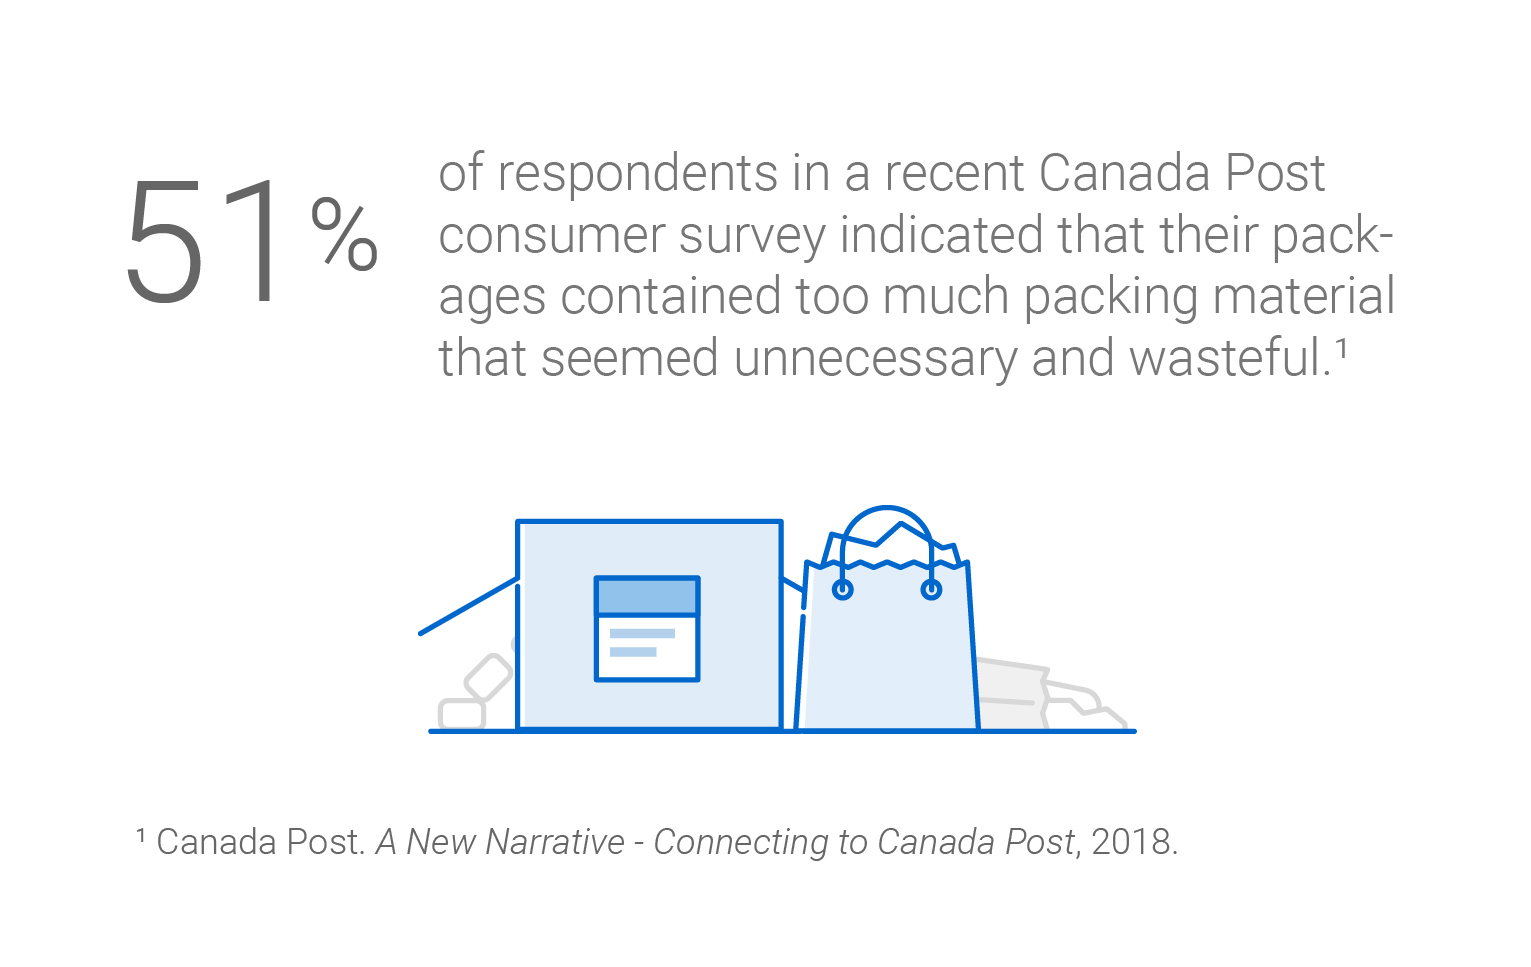 51 per cent of respondents in a recent Canada Post consumer survey indicated that their packages contained too much packing material that seemed unnecessary and wasteful. Source: 2018 Quantitative report “A New Narrative – Connecting to Canada Post”.